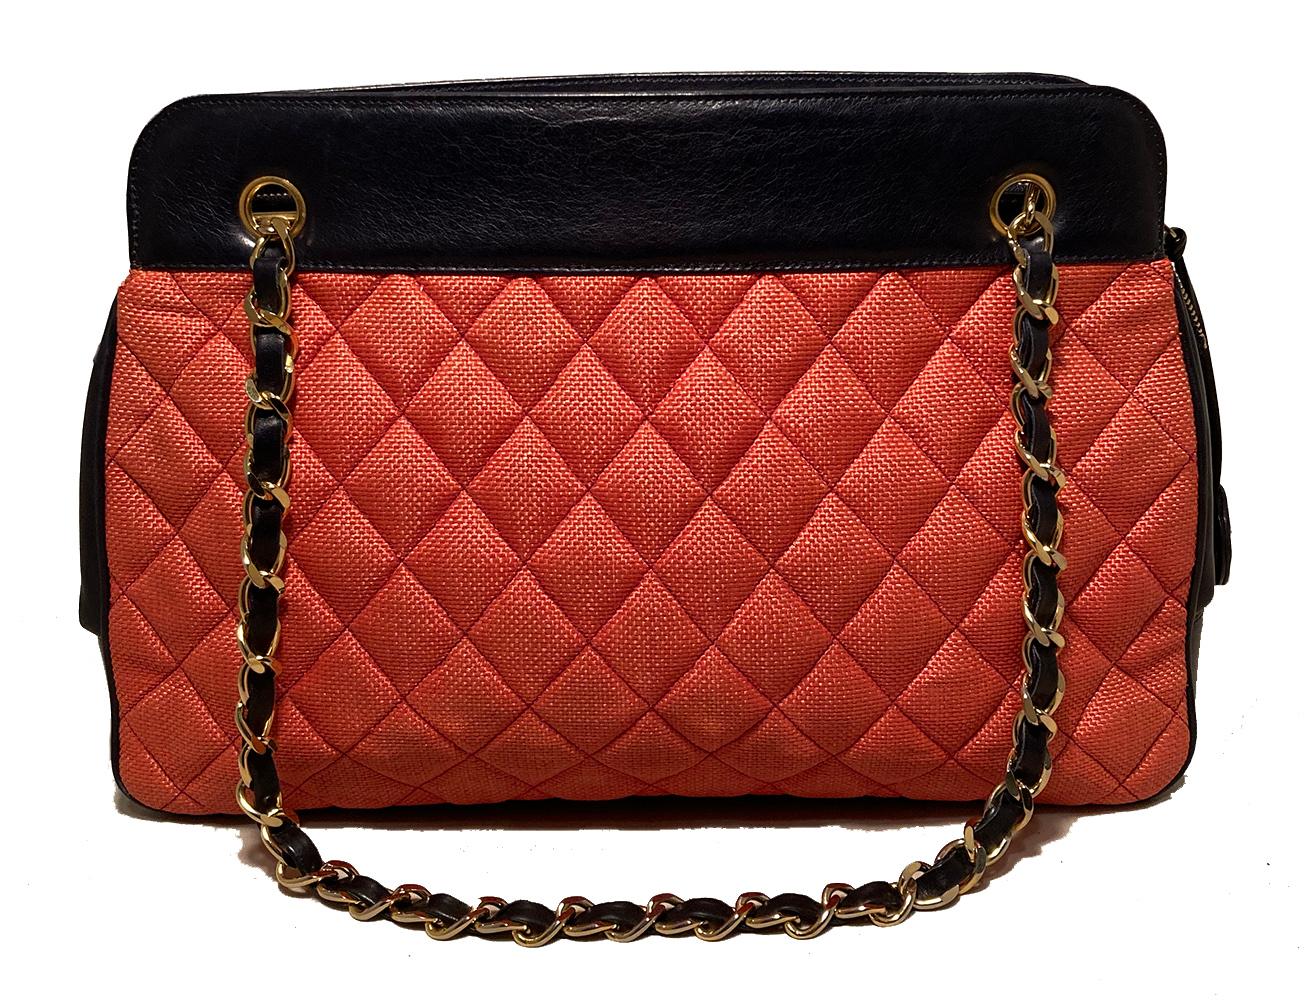 Vintage Chanel Woven Raffia and Leather Shoulder Bag Tote in very good condition. Woven coral quilted raffia along front and back exterior trimmed with navy lambskin leather and shining gold hardware. Removable woven chain and leather shoulder